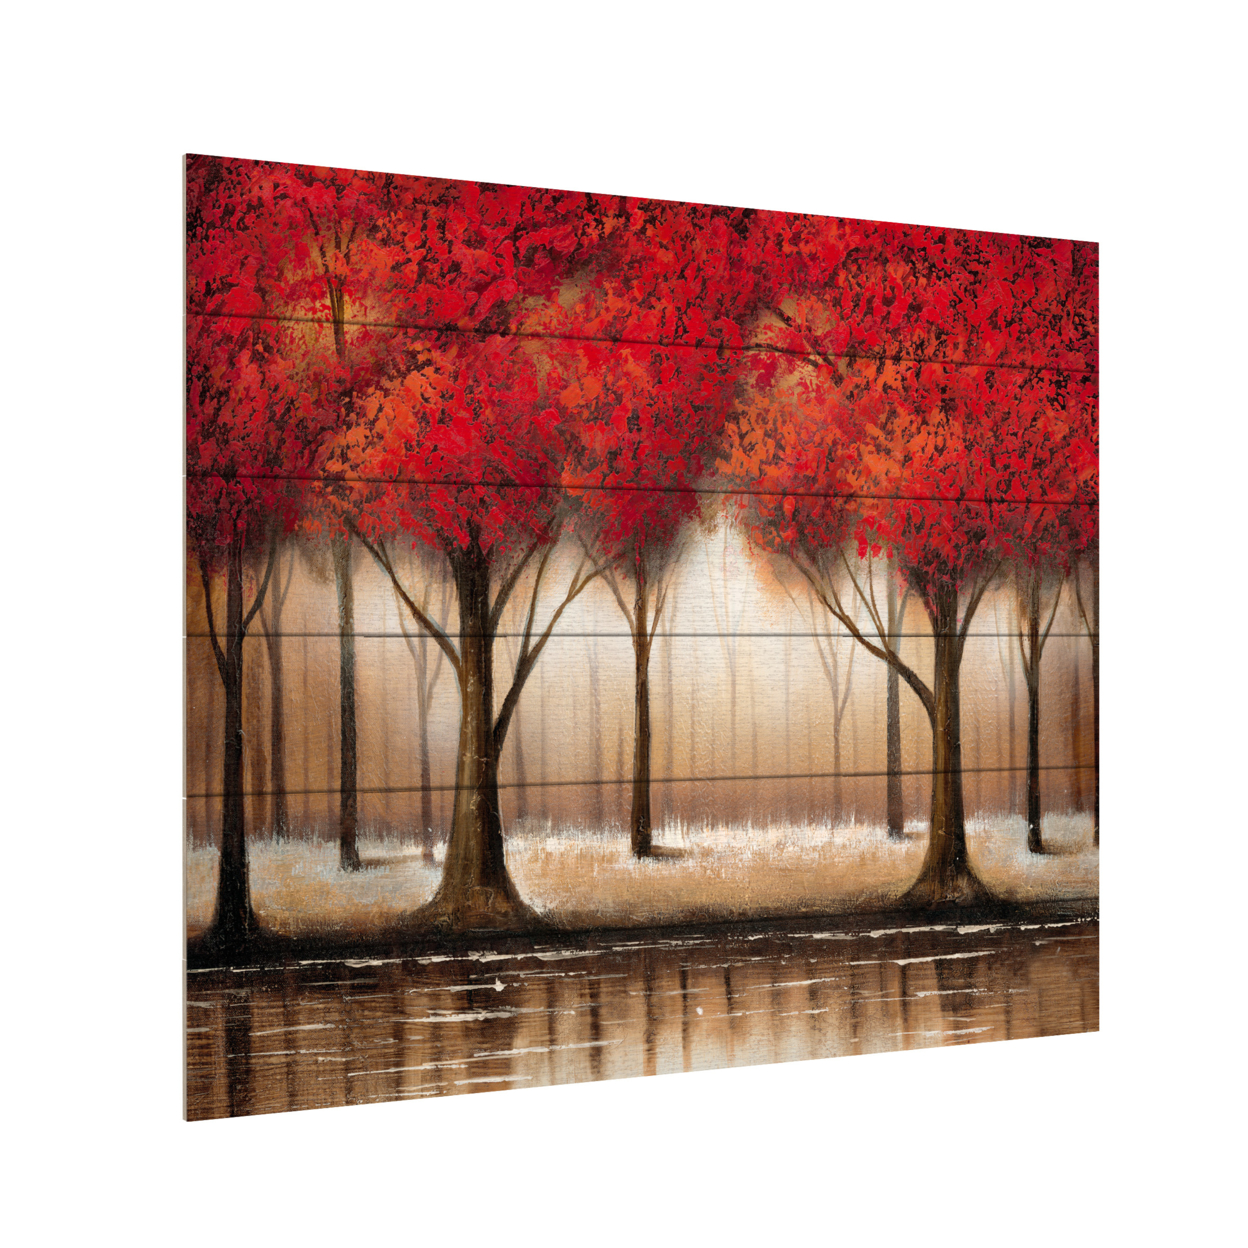 Wooden Slat Art 18 X 22 Inches Titled Parade Of Red Trees Ready To Hang Home Decor Picture